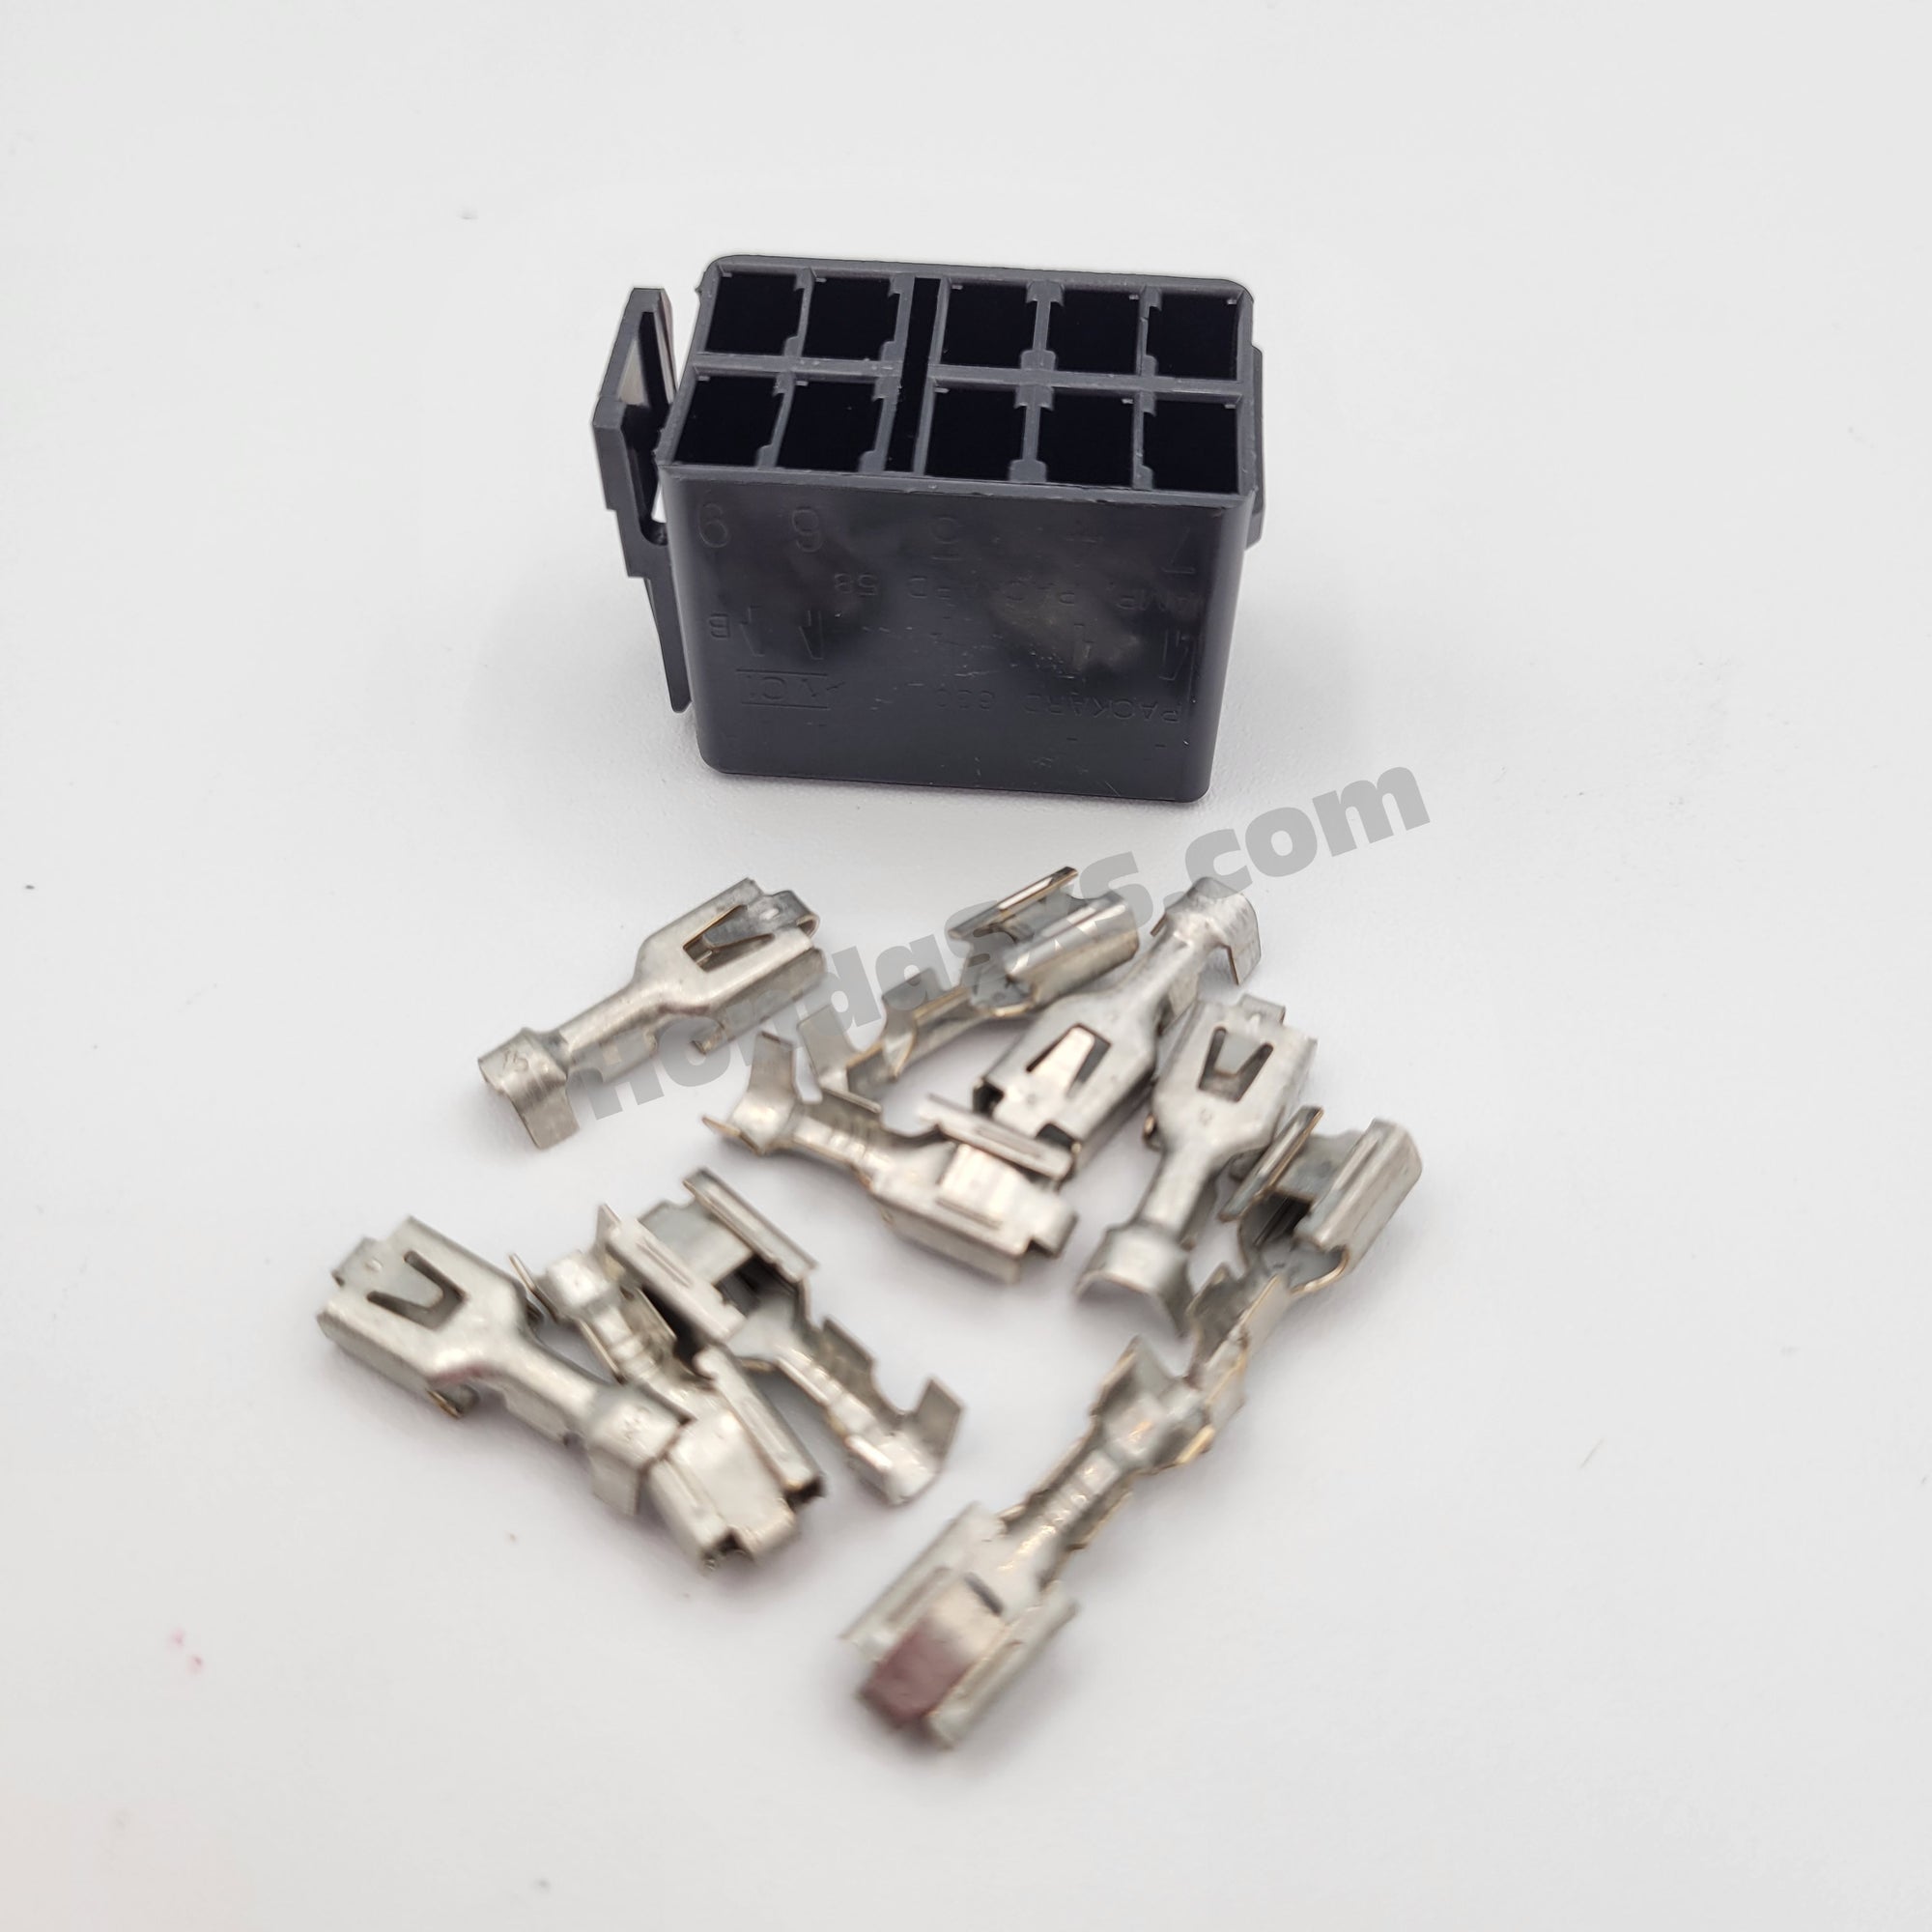 Carling 10 pin Rocker Switch Rear Block Connector Housing and Pins